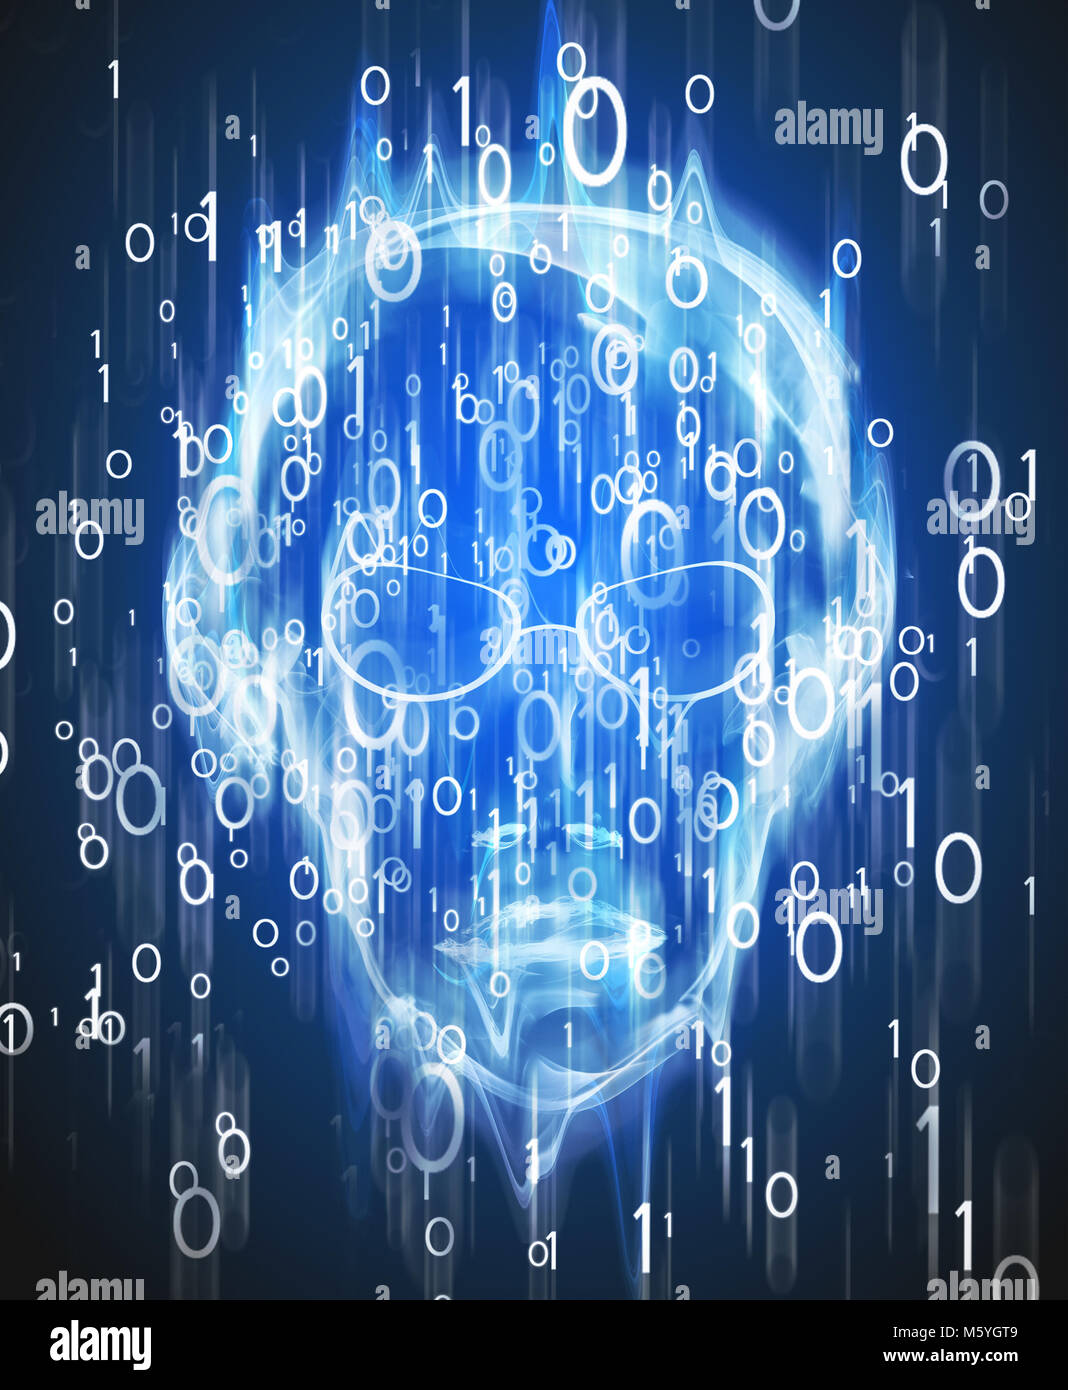 hacker intrusion  with binary code  and human face digital illustration Stock Photo